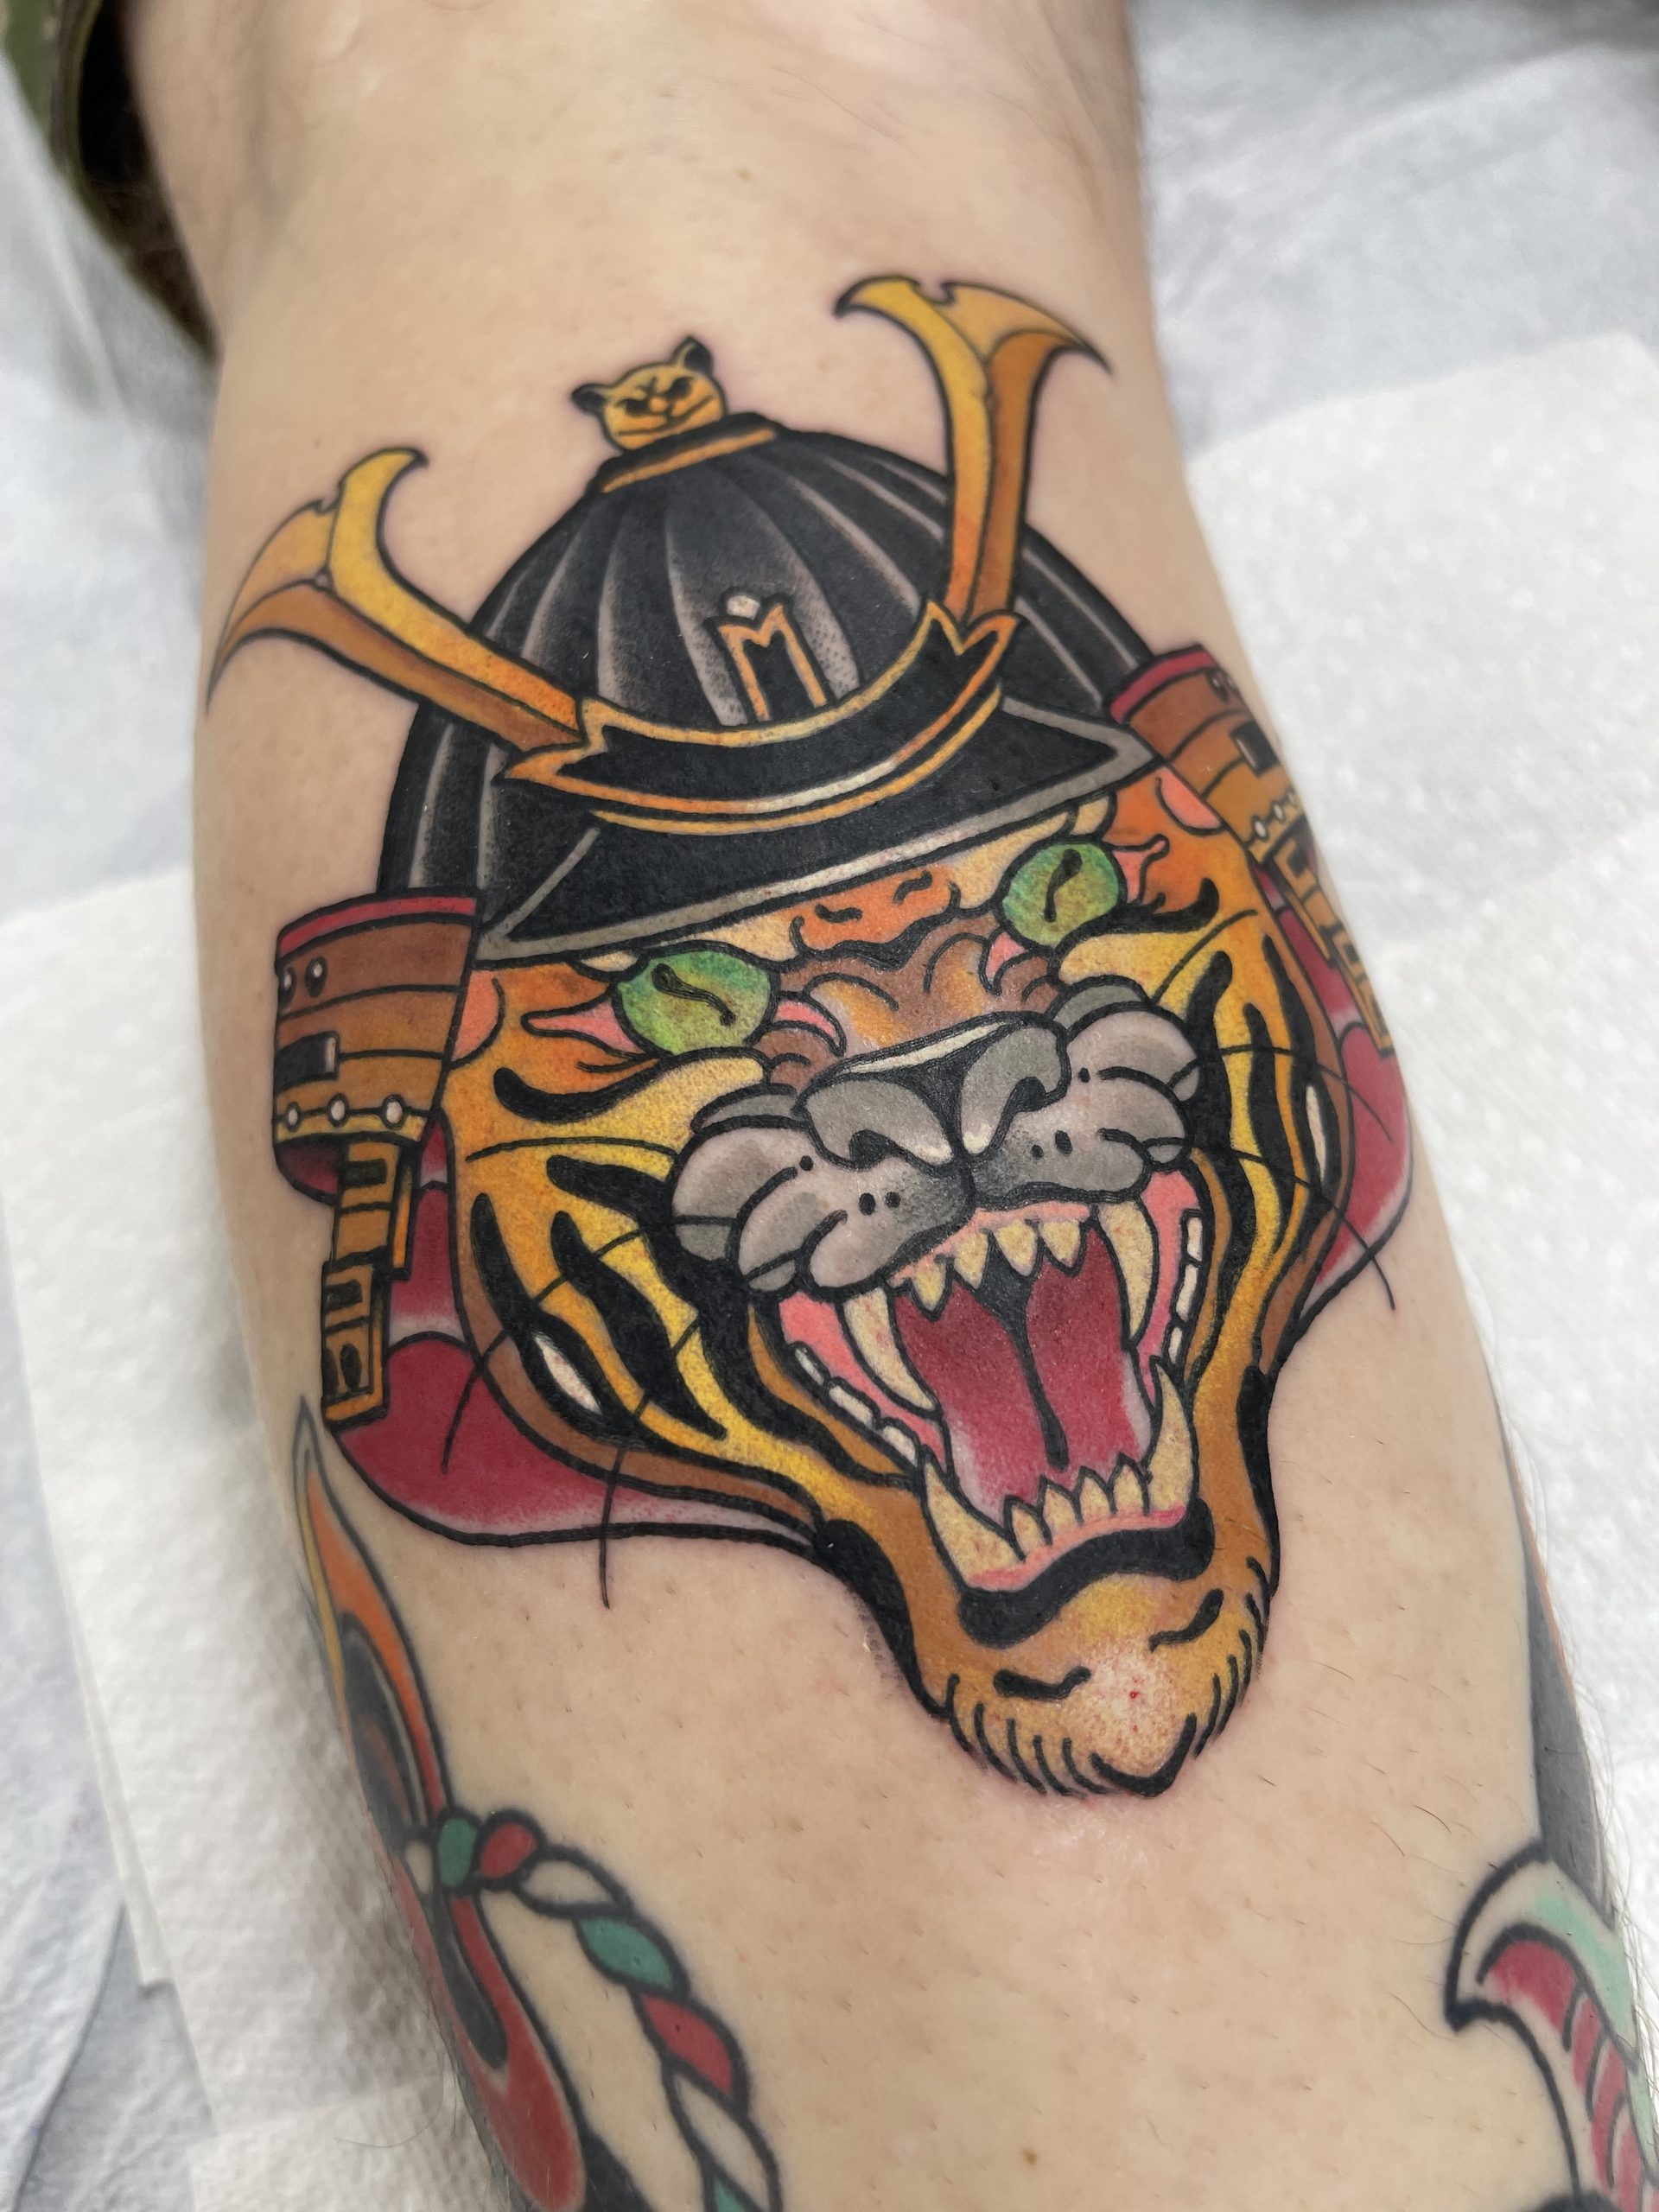 GREAT NEO-TRADITIONAL TATTOOS DONE BY JACE